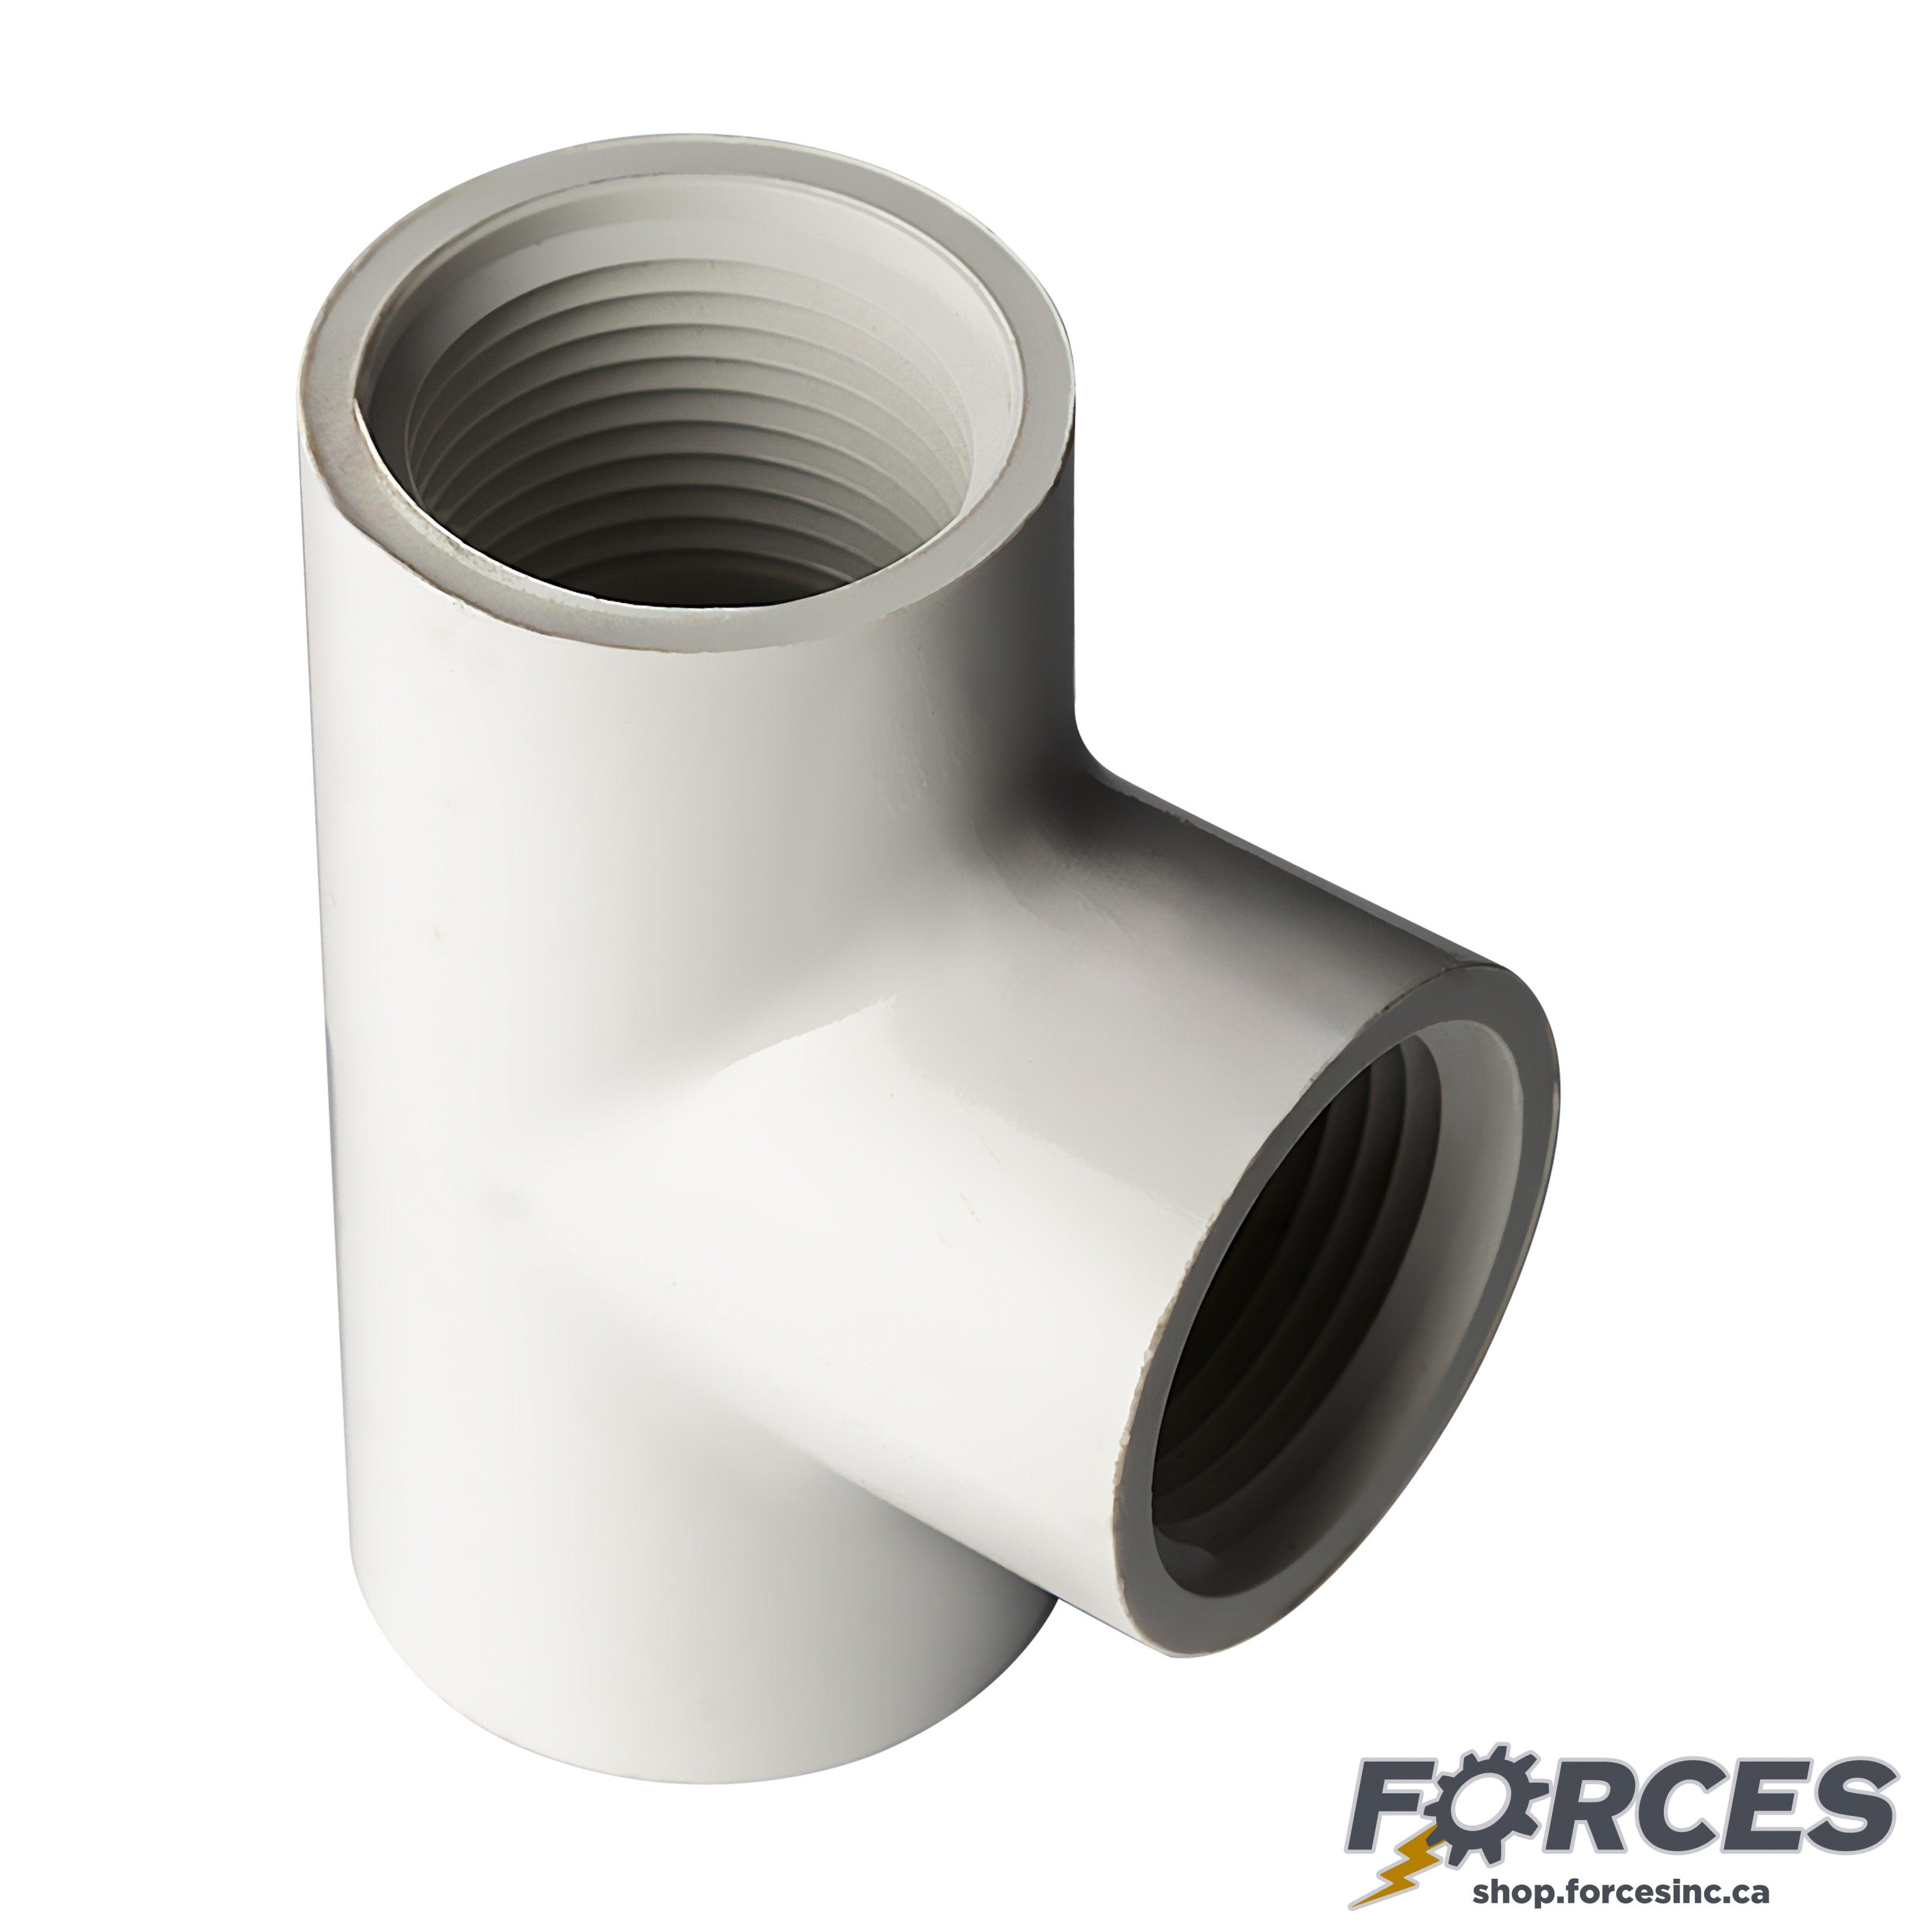 2" Tee (Threaded) Sch 40 - PVC white | 405020W - Forces Inc